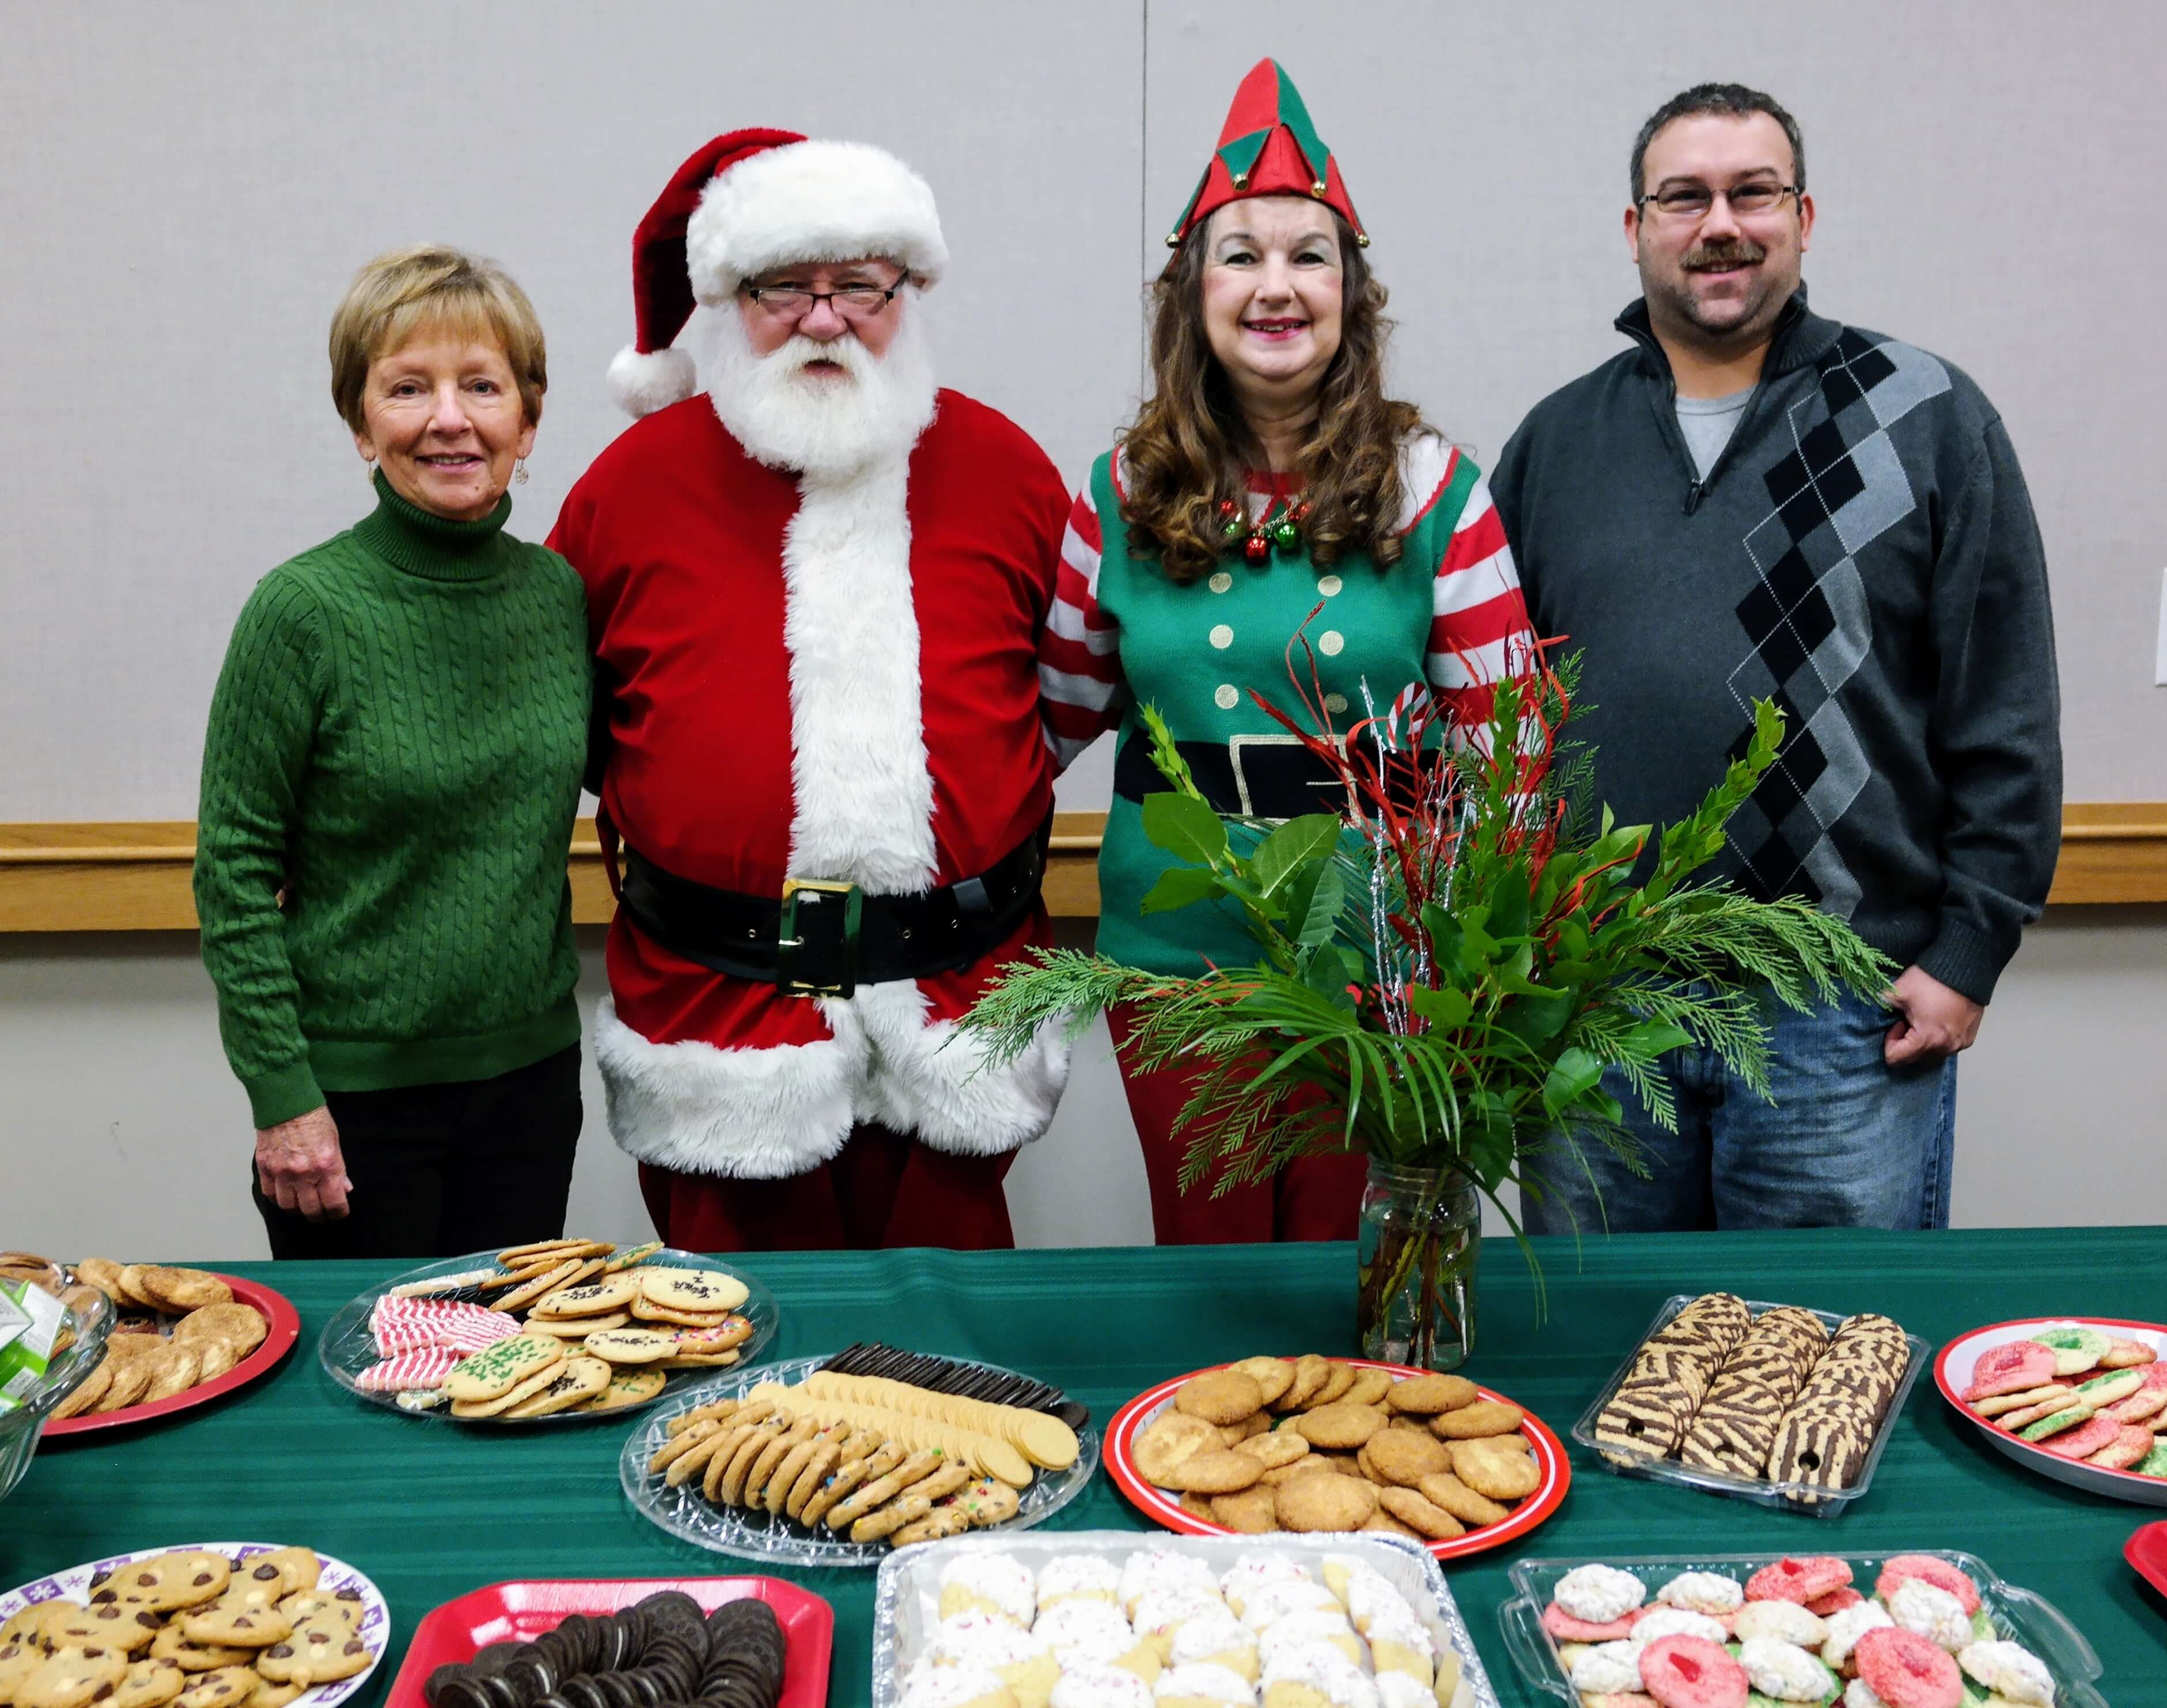 Our great volunteers donated cookies and juice for the children to have after meeting Santa